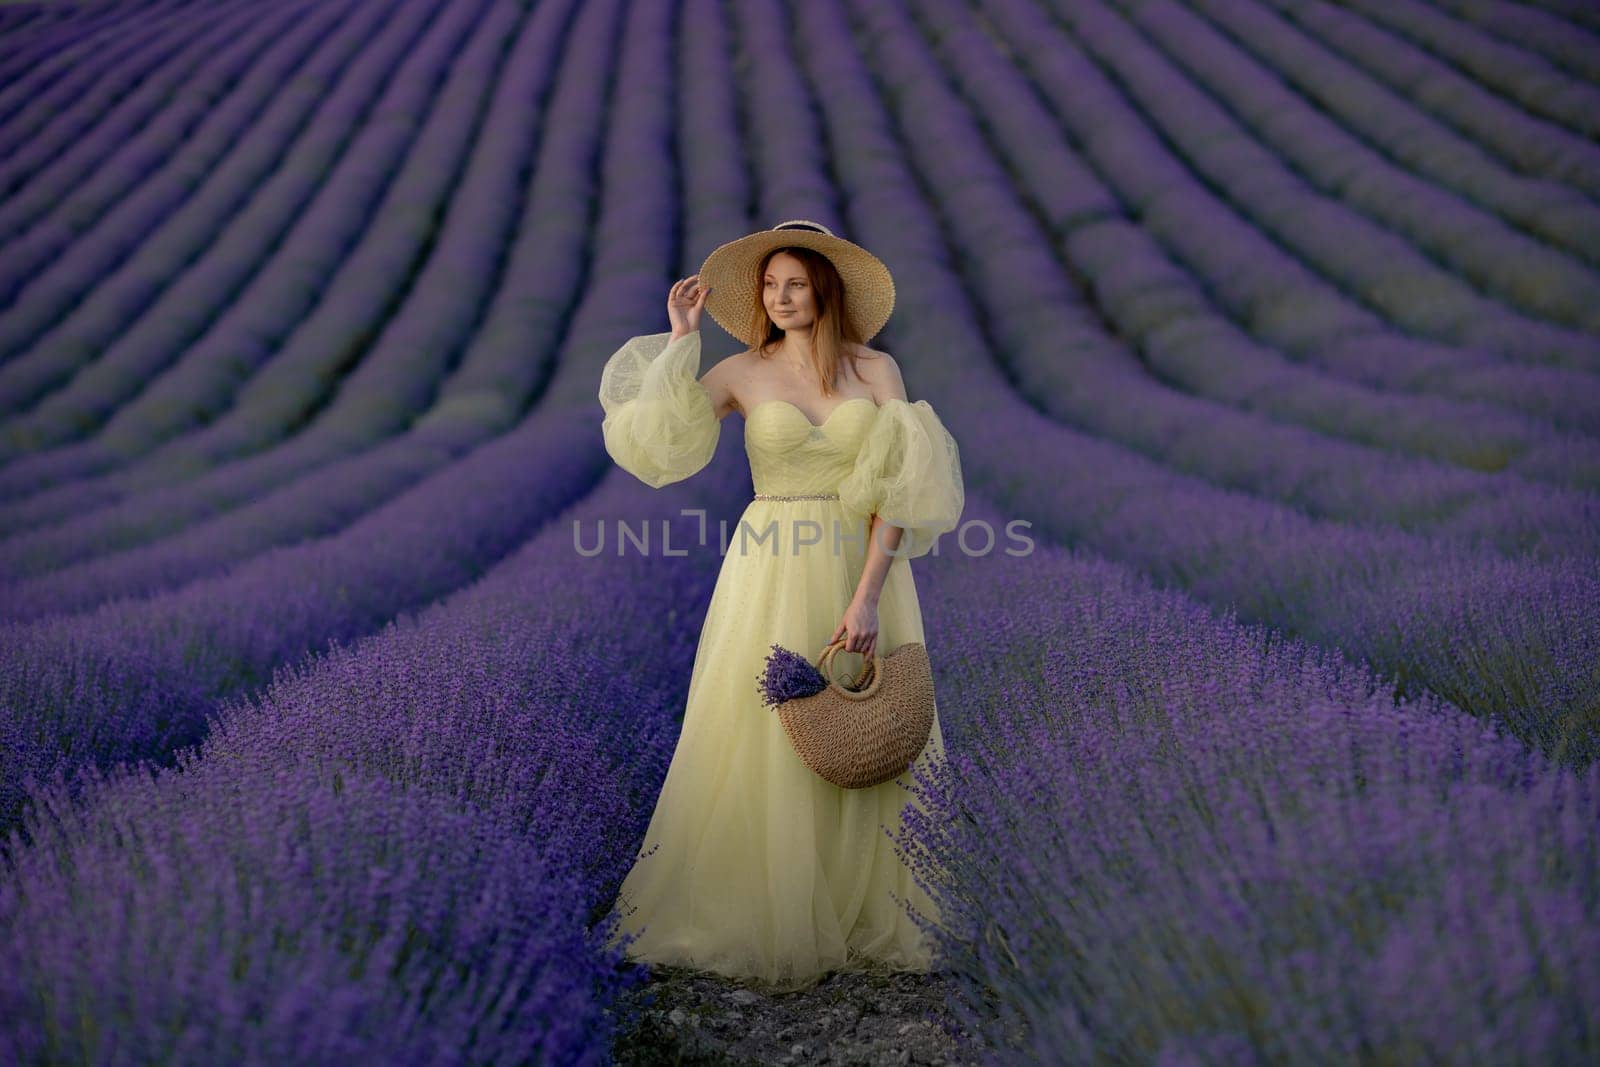 Woman poses in lavender field. Happy woman in yellow dress holds lavender bouquet. Aromatherapy concept, lavender oil, photo session in lavender.